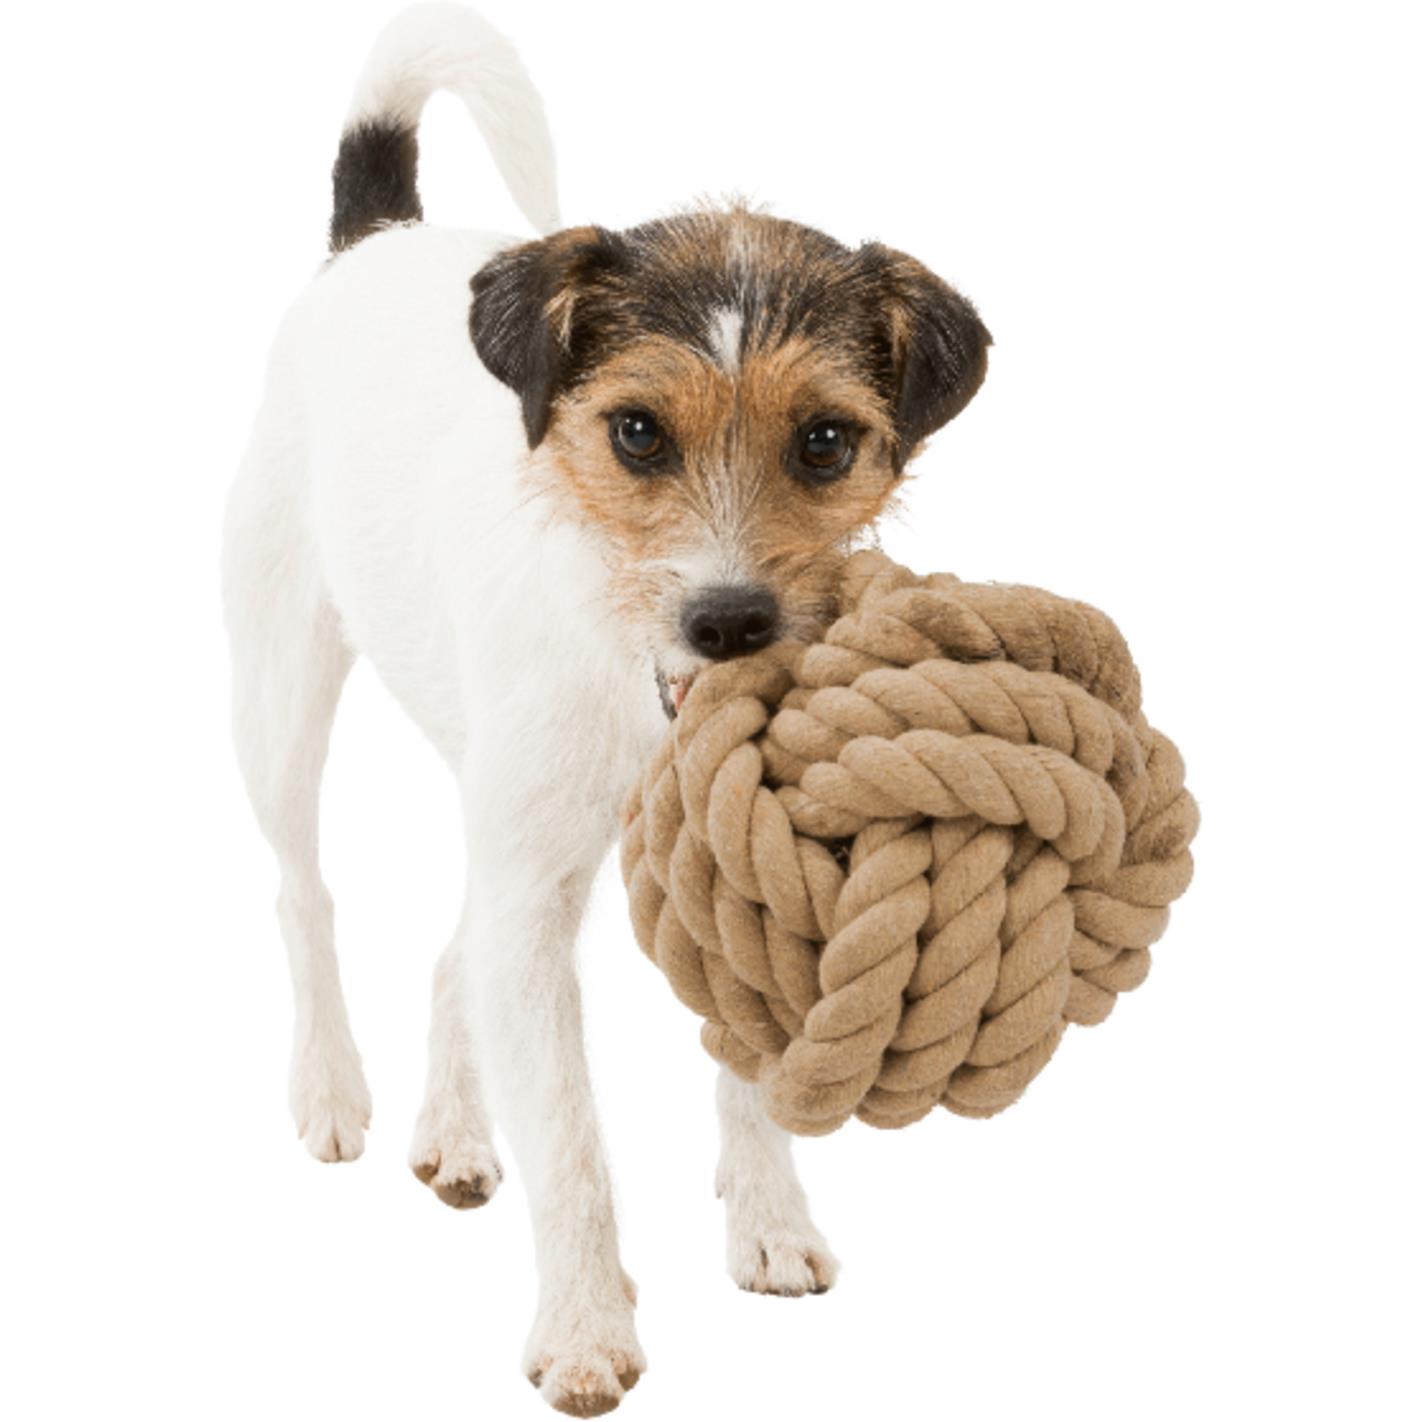 kloon onderzeeër thema Trixie Be Nordic Rope Ball Toy for Dogs, Tau Fetch Ball, 13 cm,  Polyester/Cotton | eBay